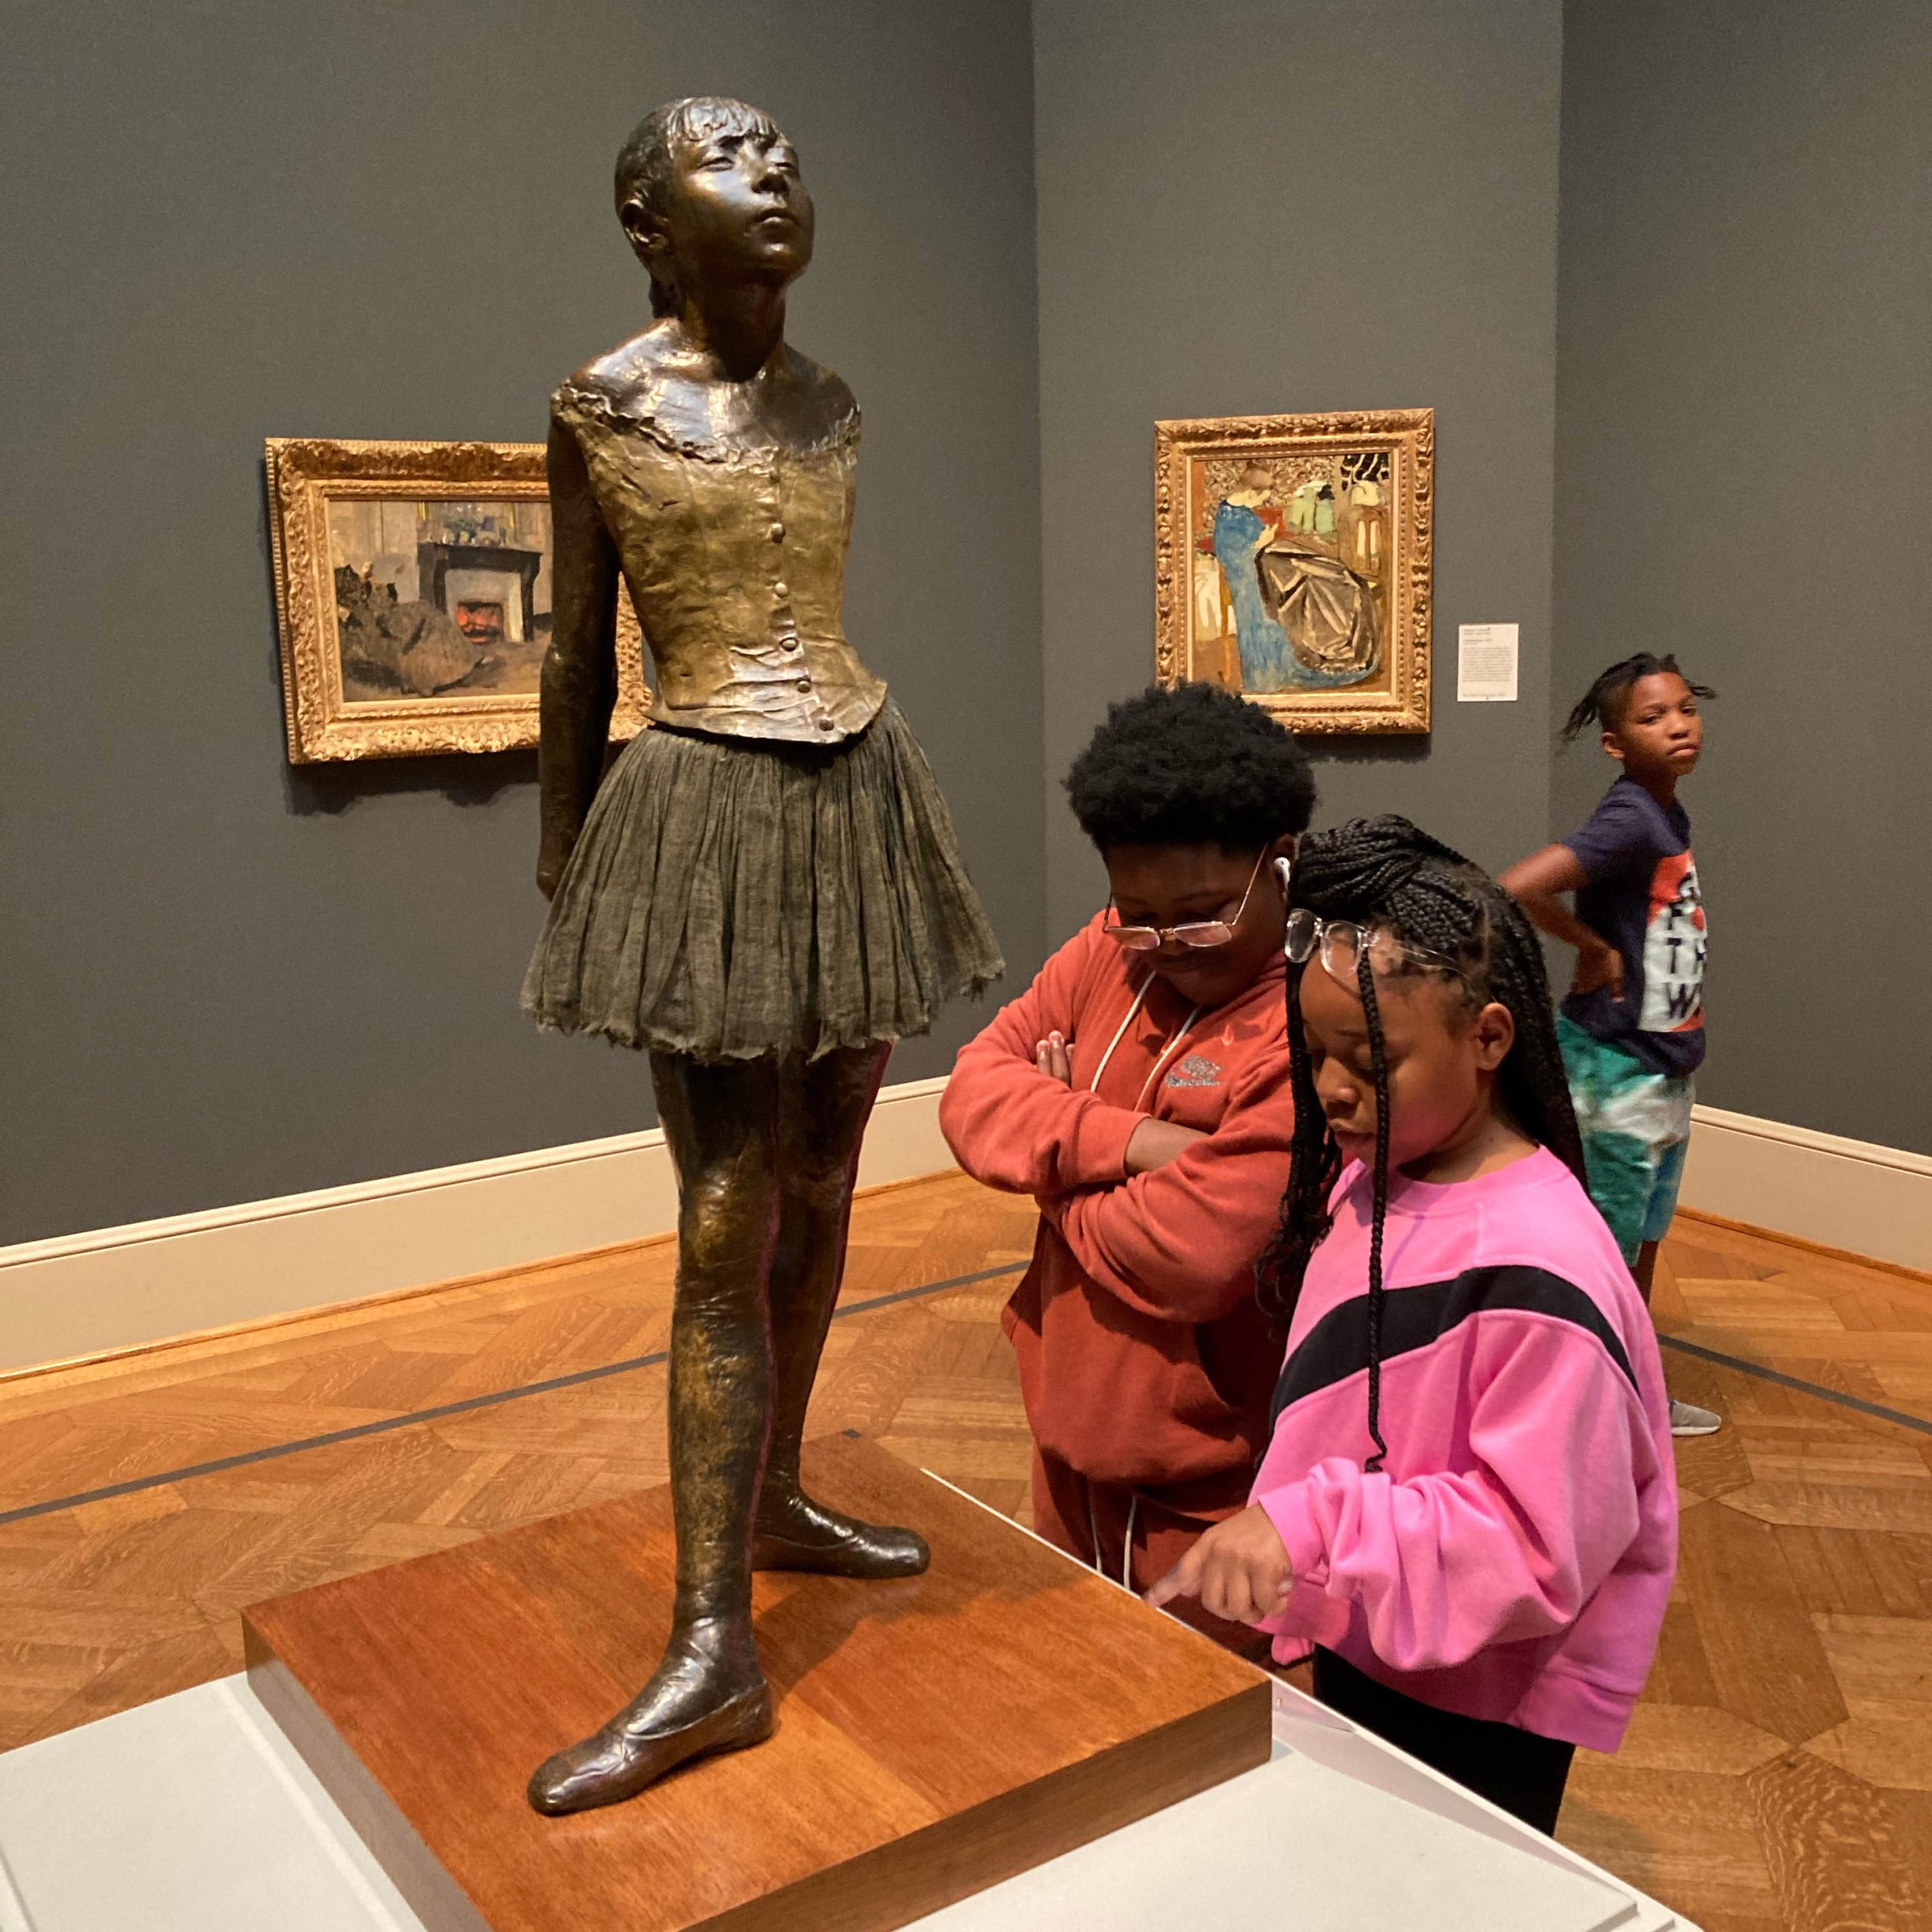 St. Louis scholars enjoying an educational field trip to one of the local museums